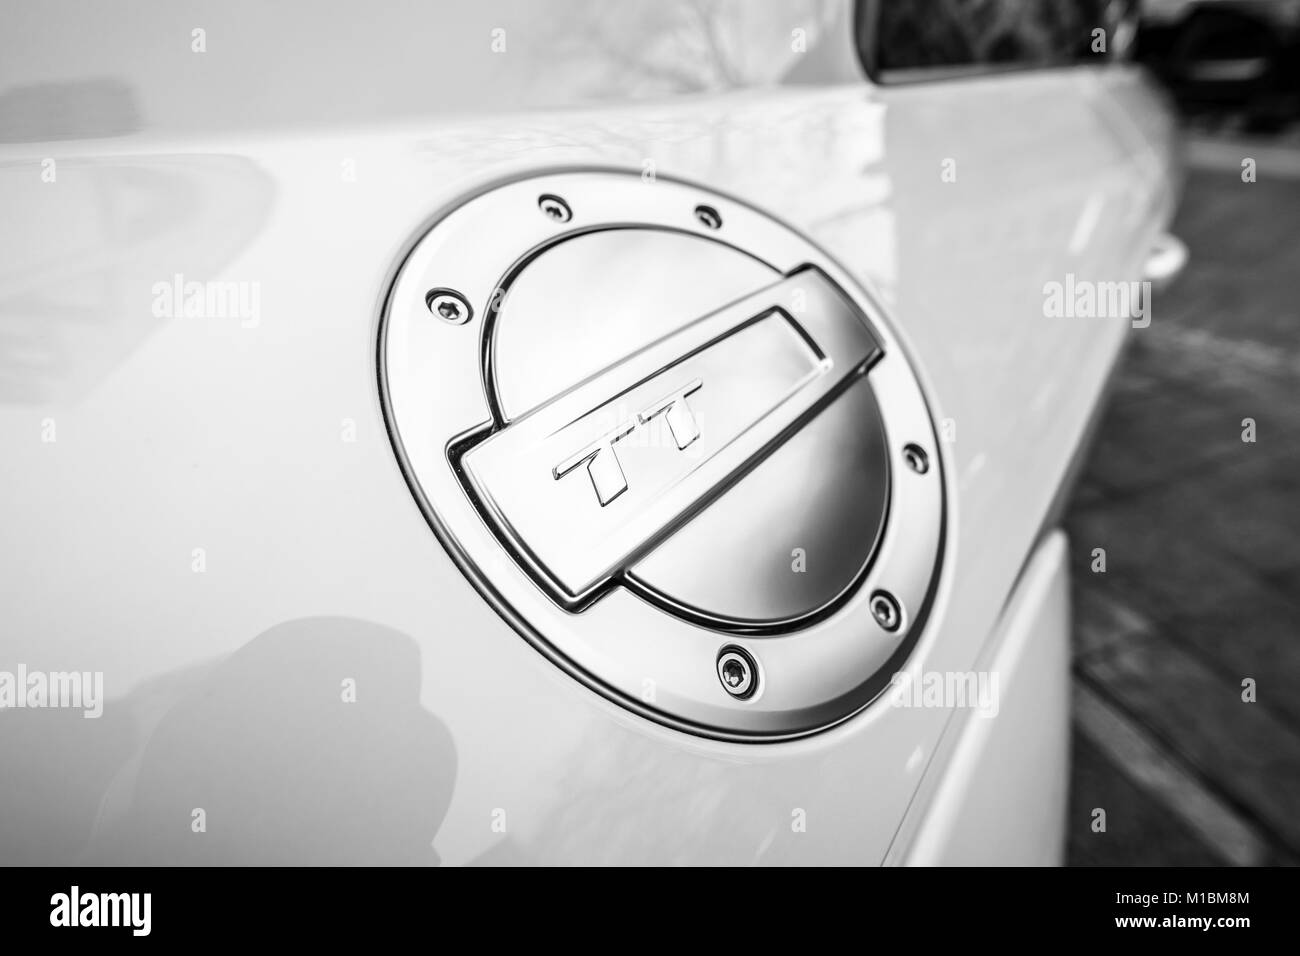 BERLIN - DECEMBER 21, 2017: Showroom. Fuel tank cap of the compact sports coupe Audi TT RS. Since 2016. Black and white. Stock Photo